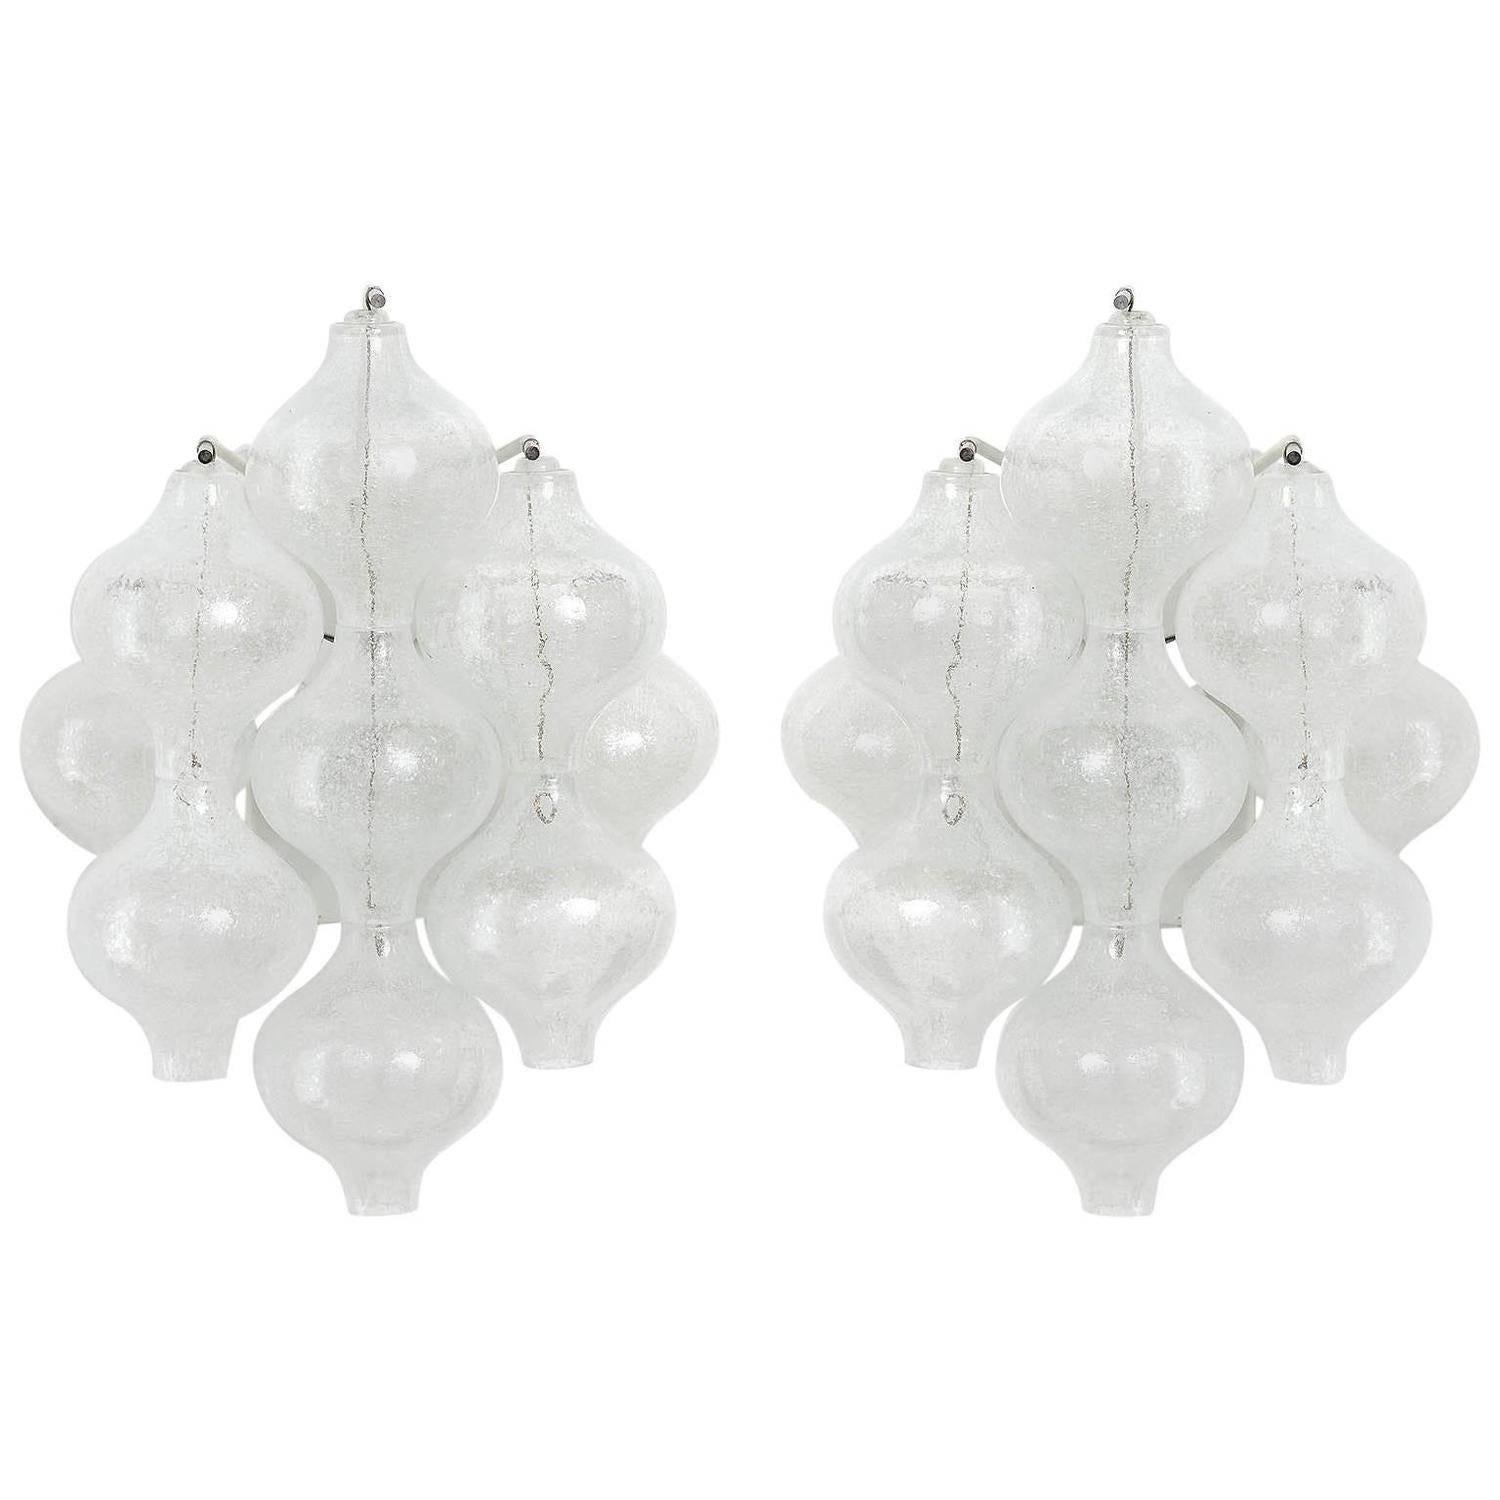 A set of a ceiling light fixture model 'Tulipan' and a matching pair of wall lamps by J.T. Kalmar, Vienna, Austria, manufactured in midcentury, circa 1970 (late 1960s-early 1970s).
The name Tulipan derives from the tulip shaped handblown bubble